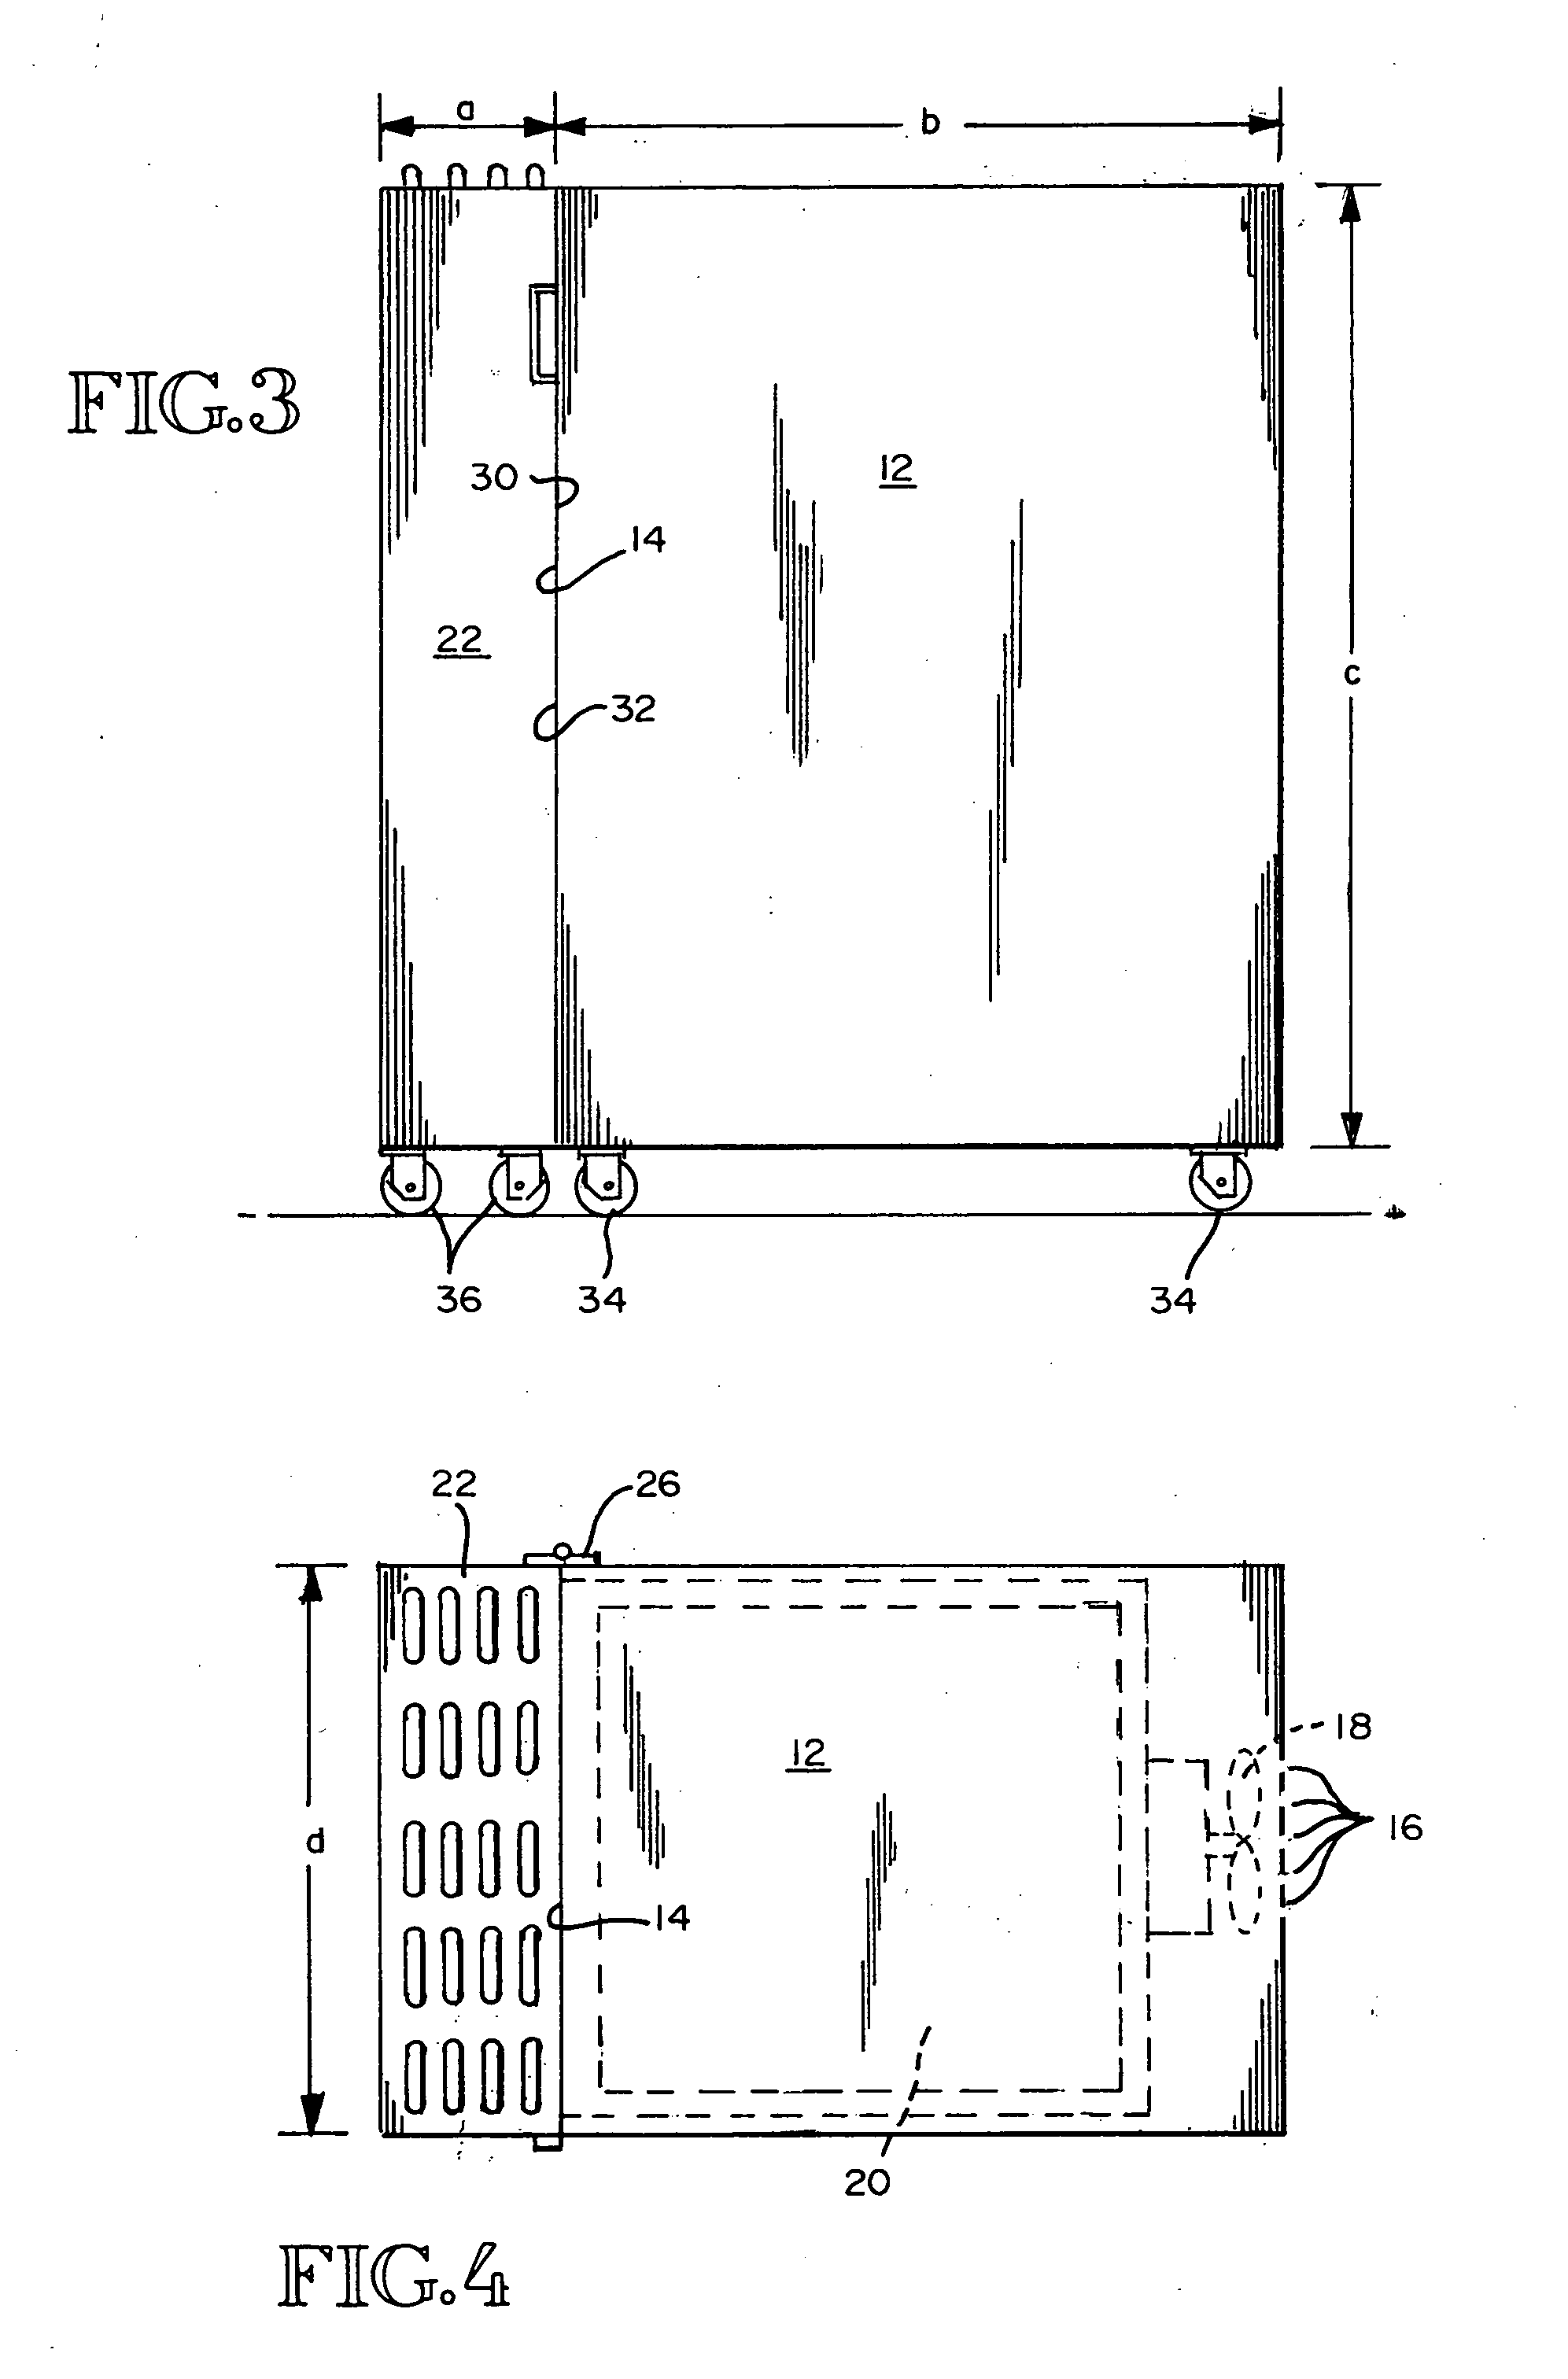 Method and apparatus for cooling devices that in use generate unwanted heat